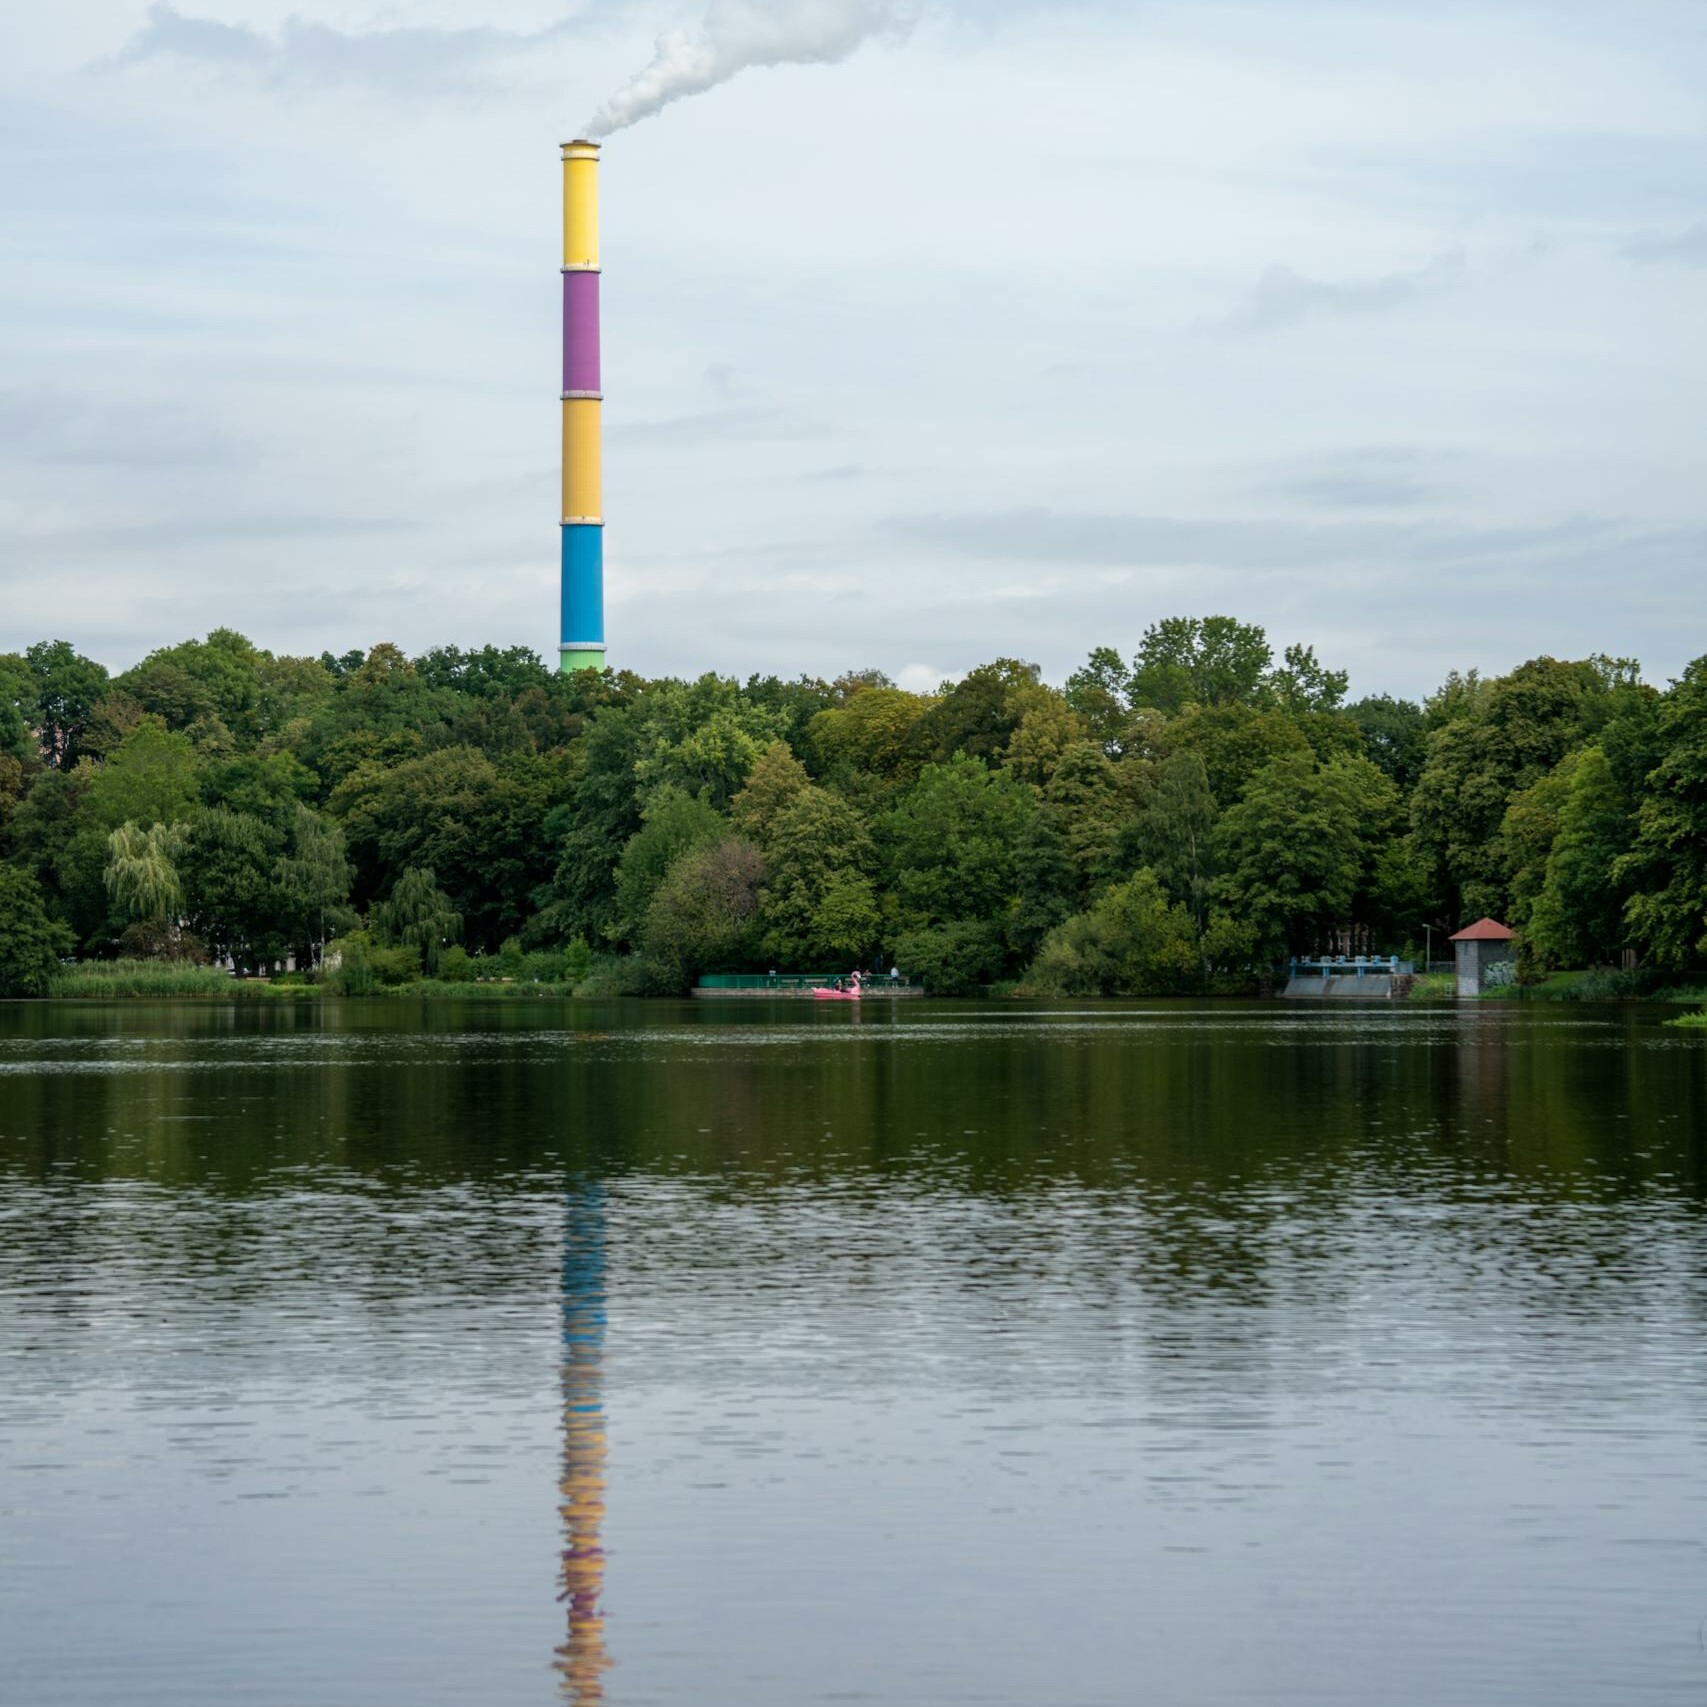 Industrial Chimney on Lake and Forest Landscape